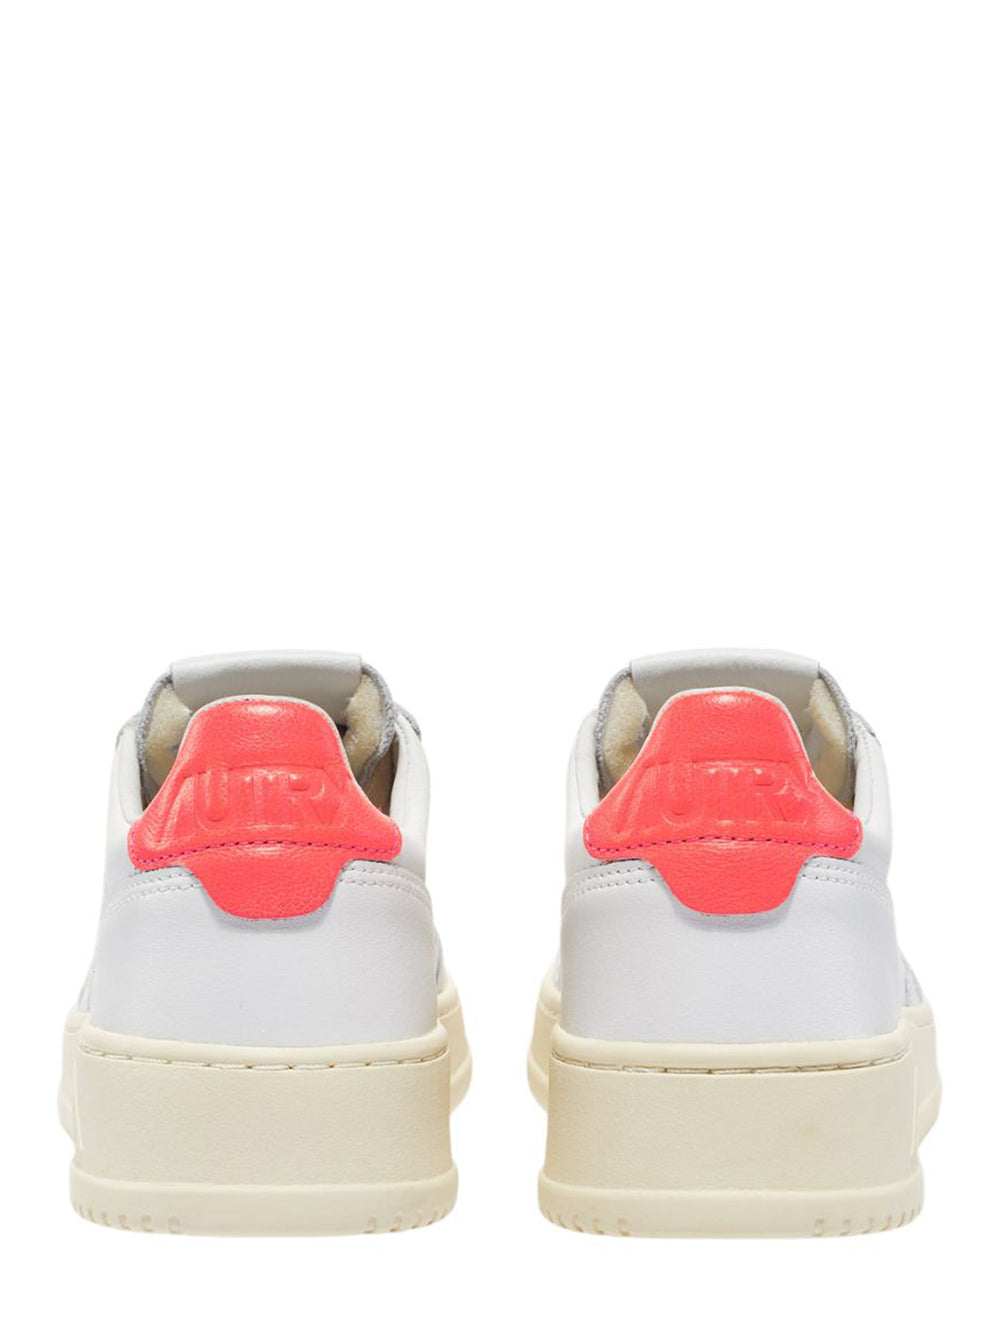 Medalist Low Sneakers In Leather Color (White And Fluorescent Pink) (Women)